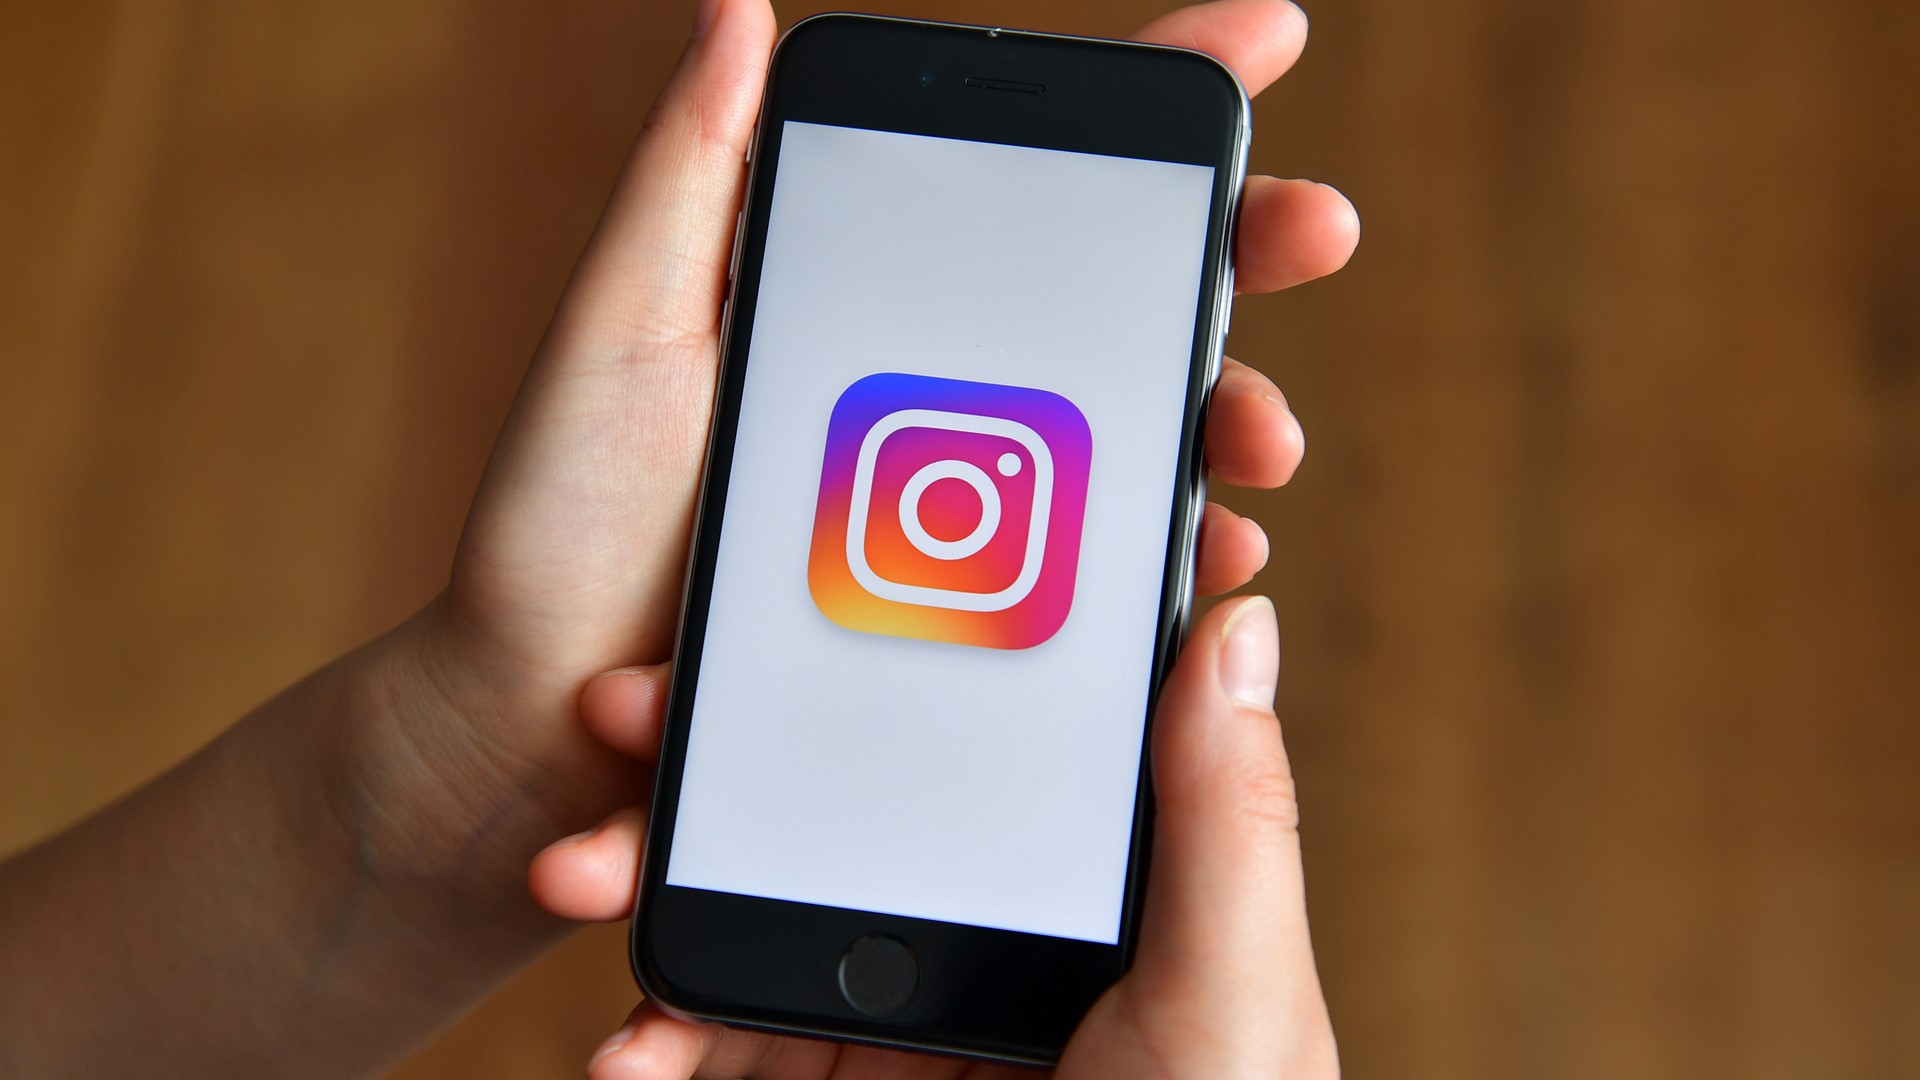 As of May 11, Instagram's parent company, Meta, has removed the ability to use some filters. Meta says this is due to Texas' facial recognition laws.